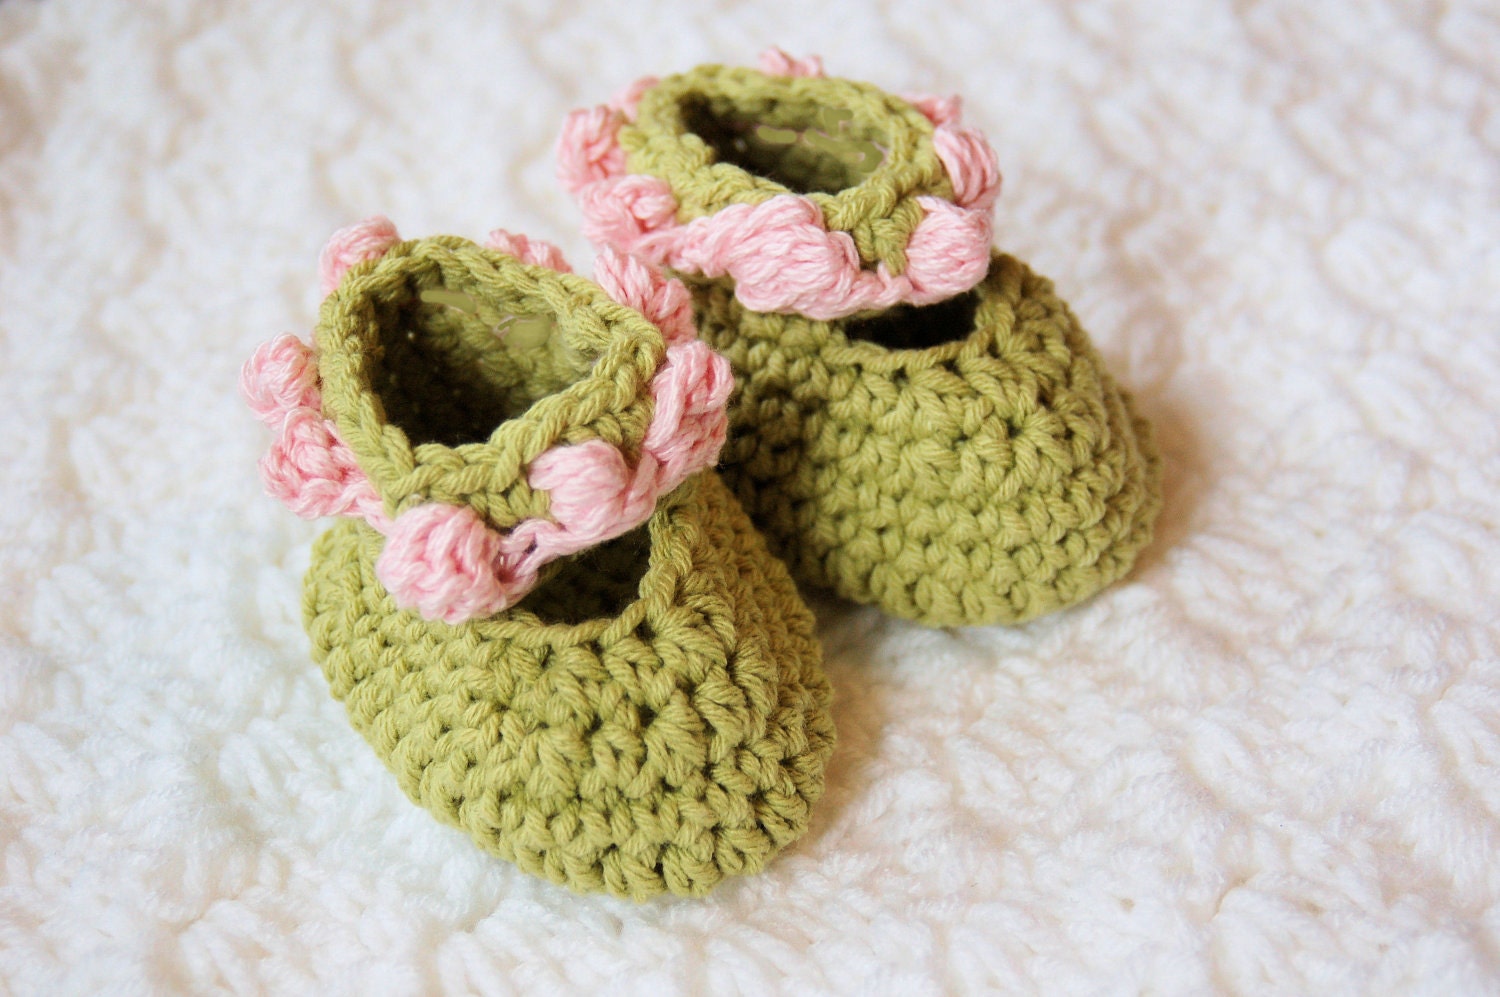 Earthy Girlie Hat and MaryJanes Crochet Pattern Buy Two Patterns Get 3RD. Free